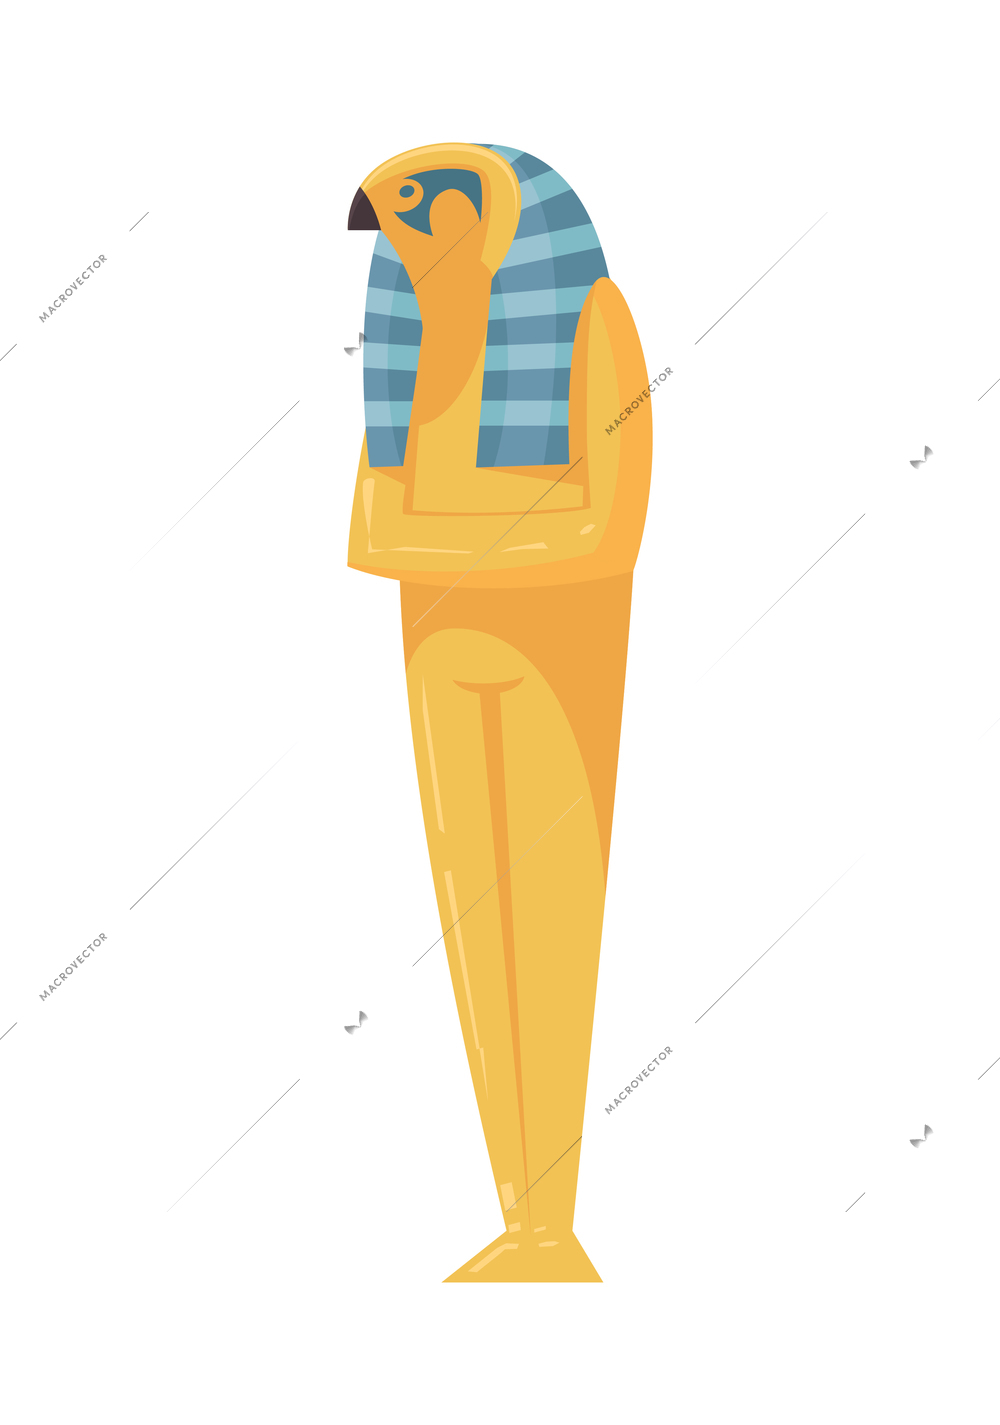 Egyptian tomb composition with isolated image of decorated ancient statue with head of golden bird vector illustration